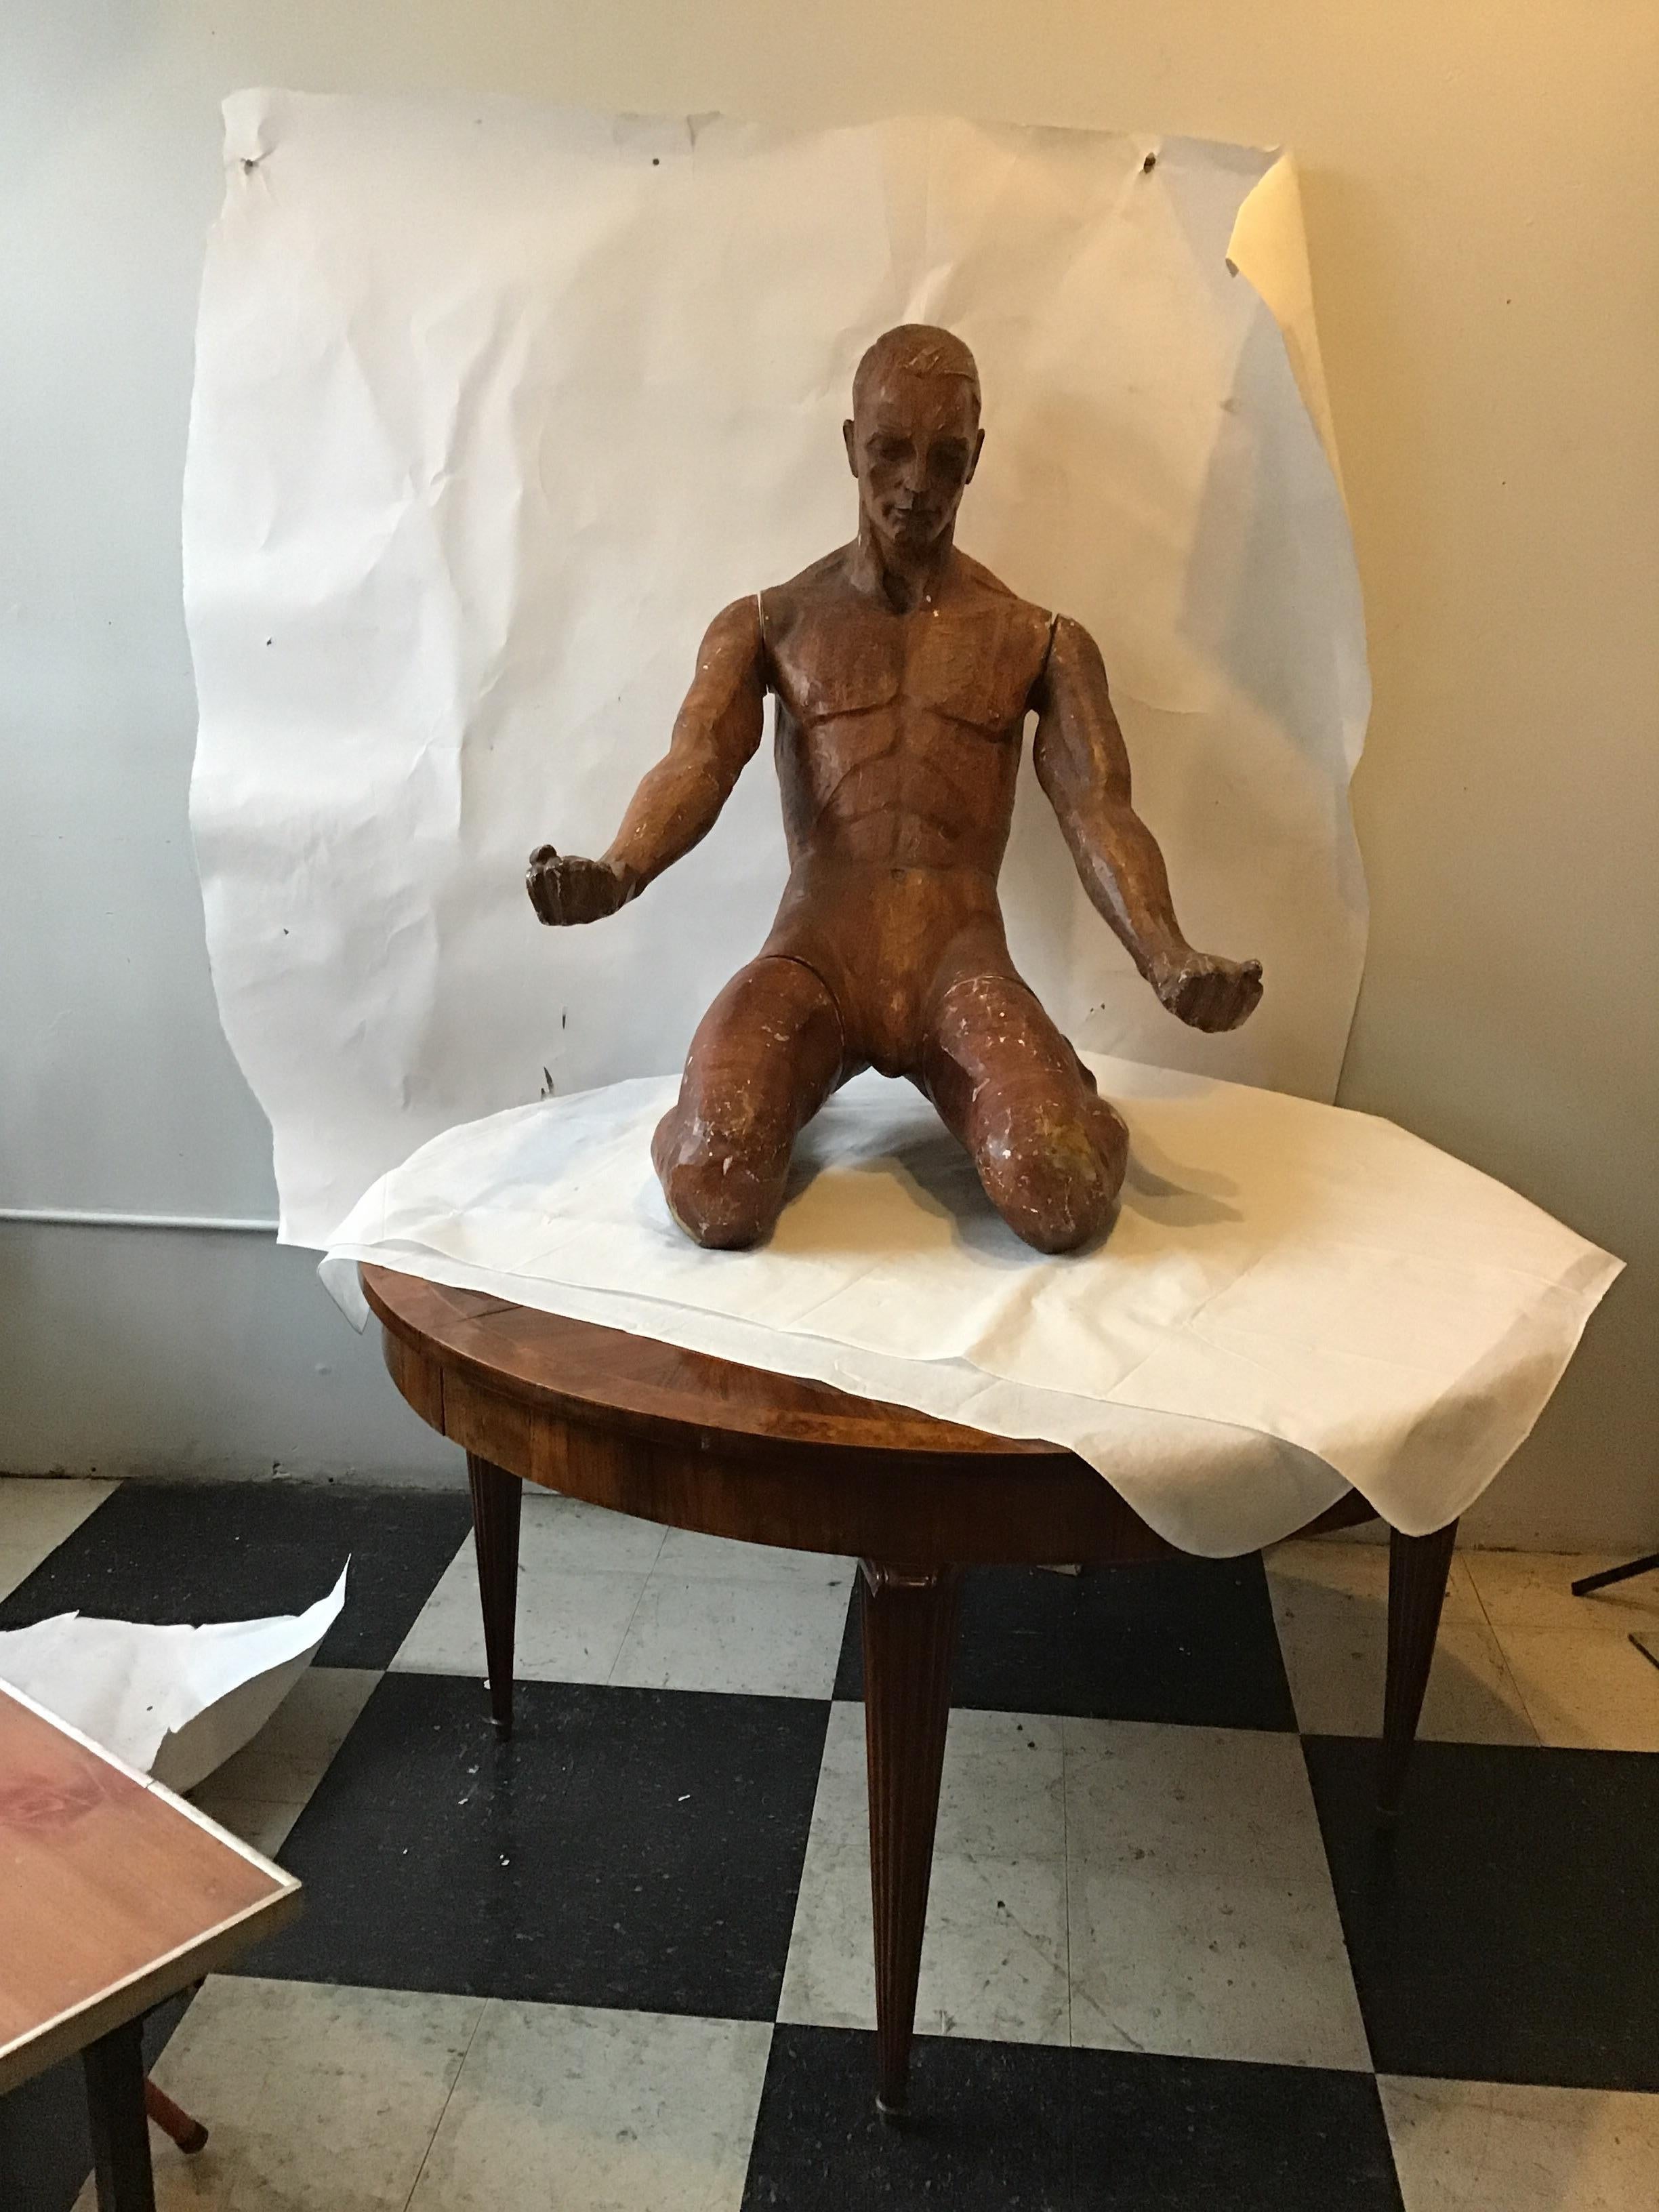 1940s fiberglass life-size male mannequin. Was used to model bathing suits. Mannequin can be disassembled.